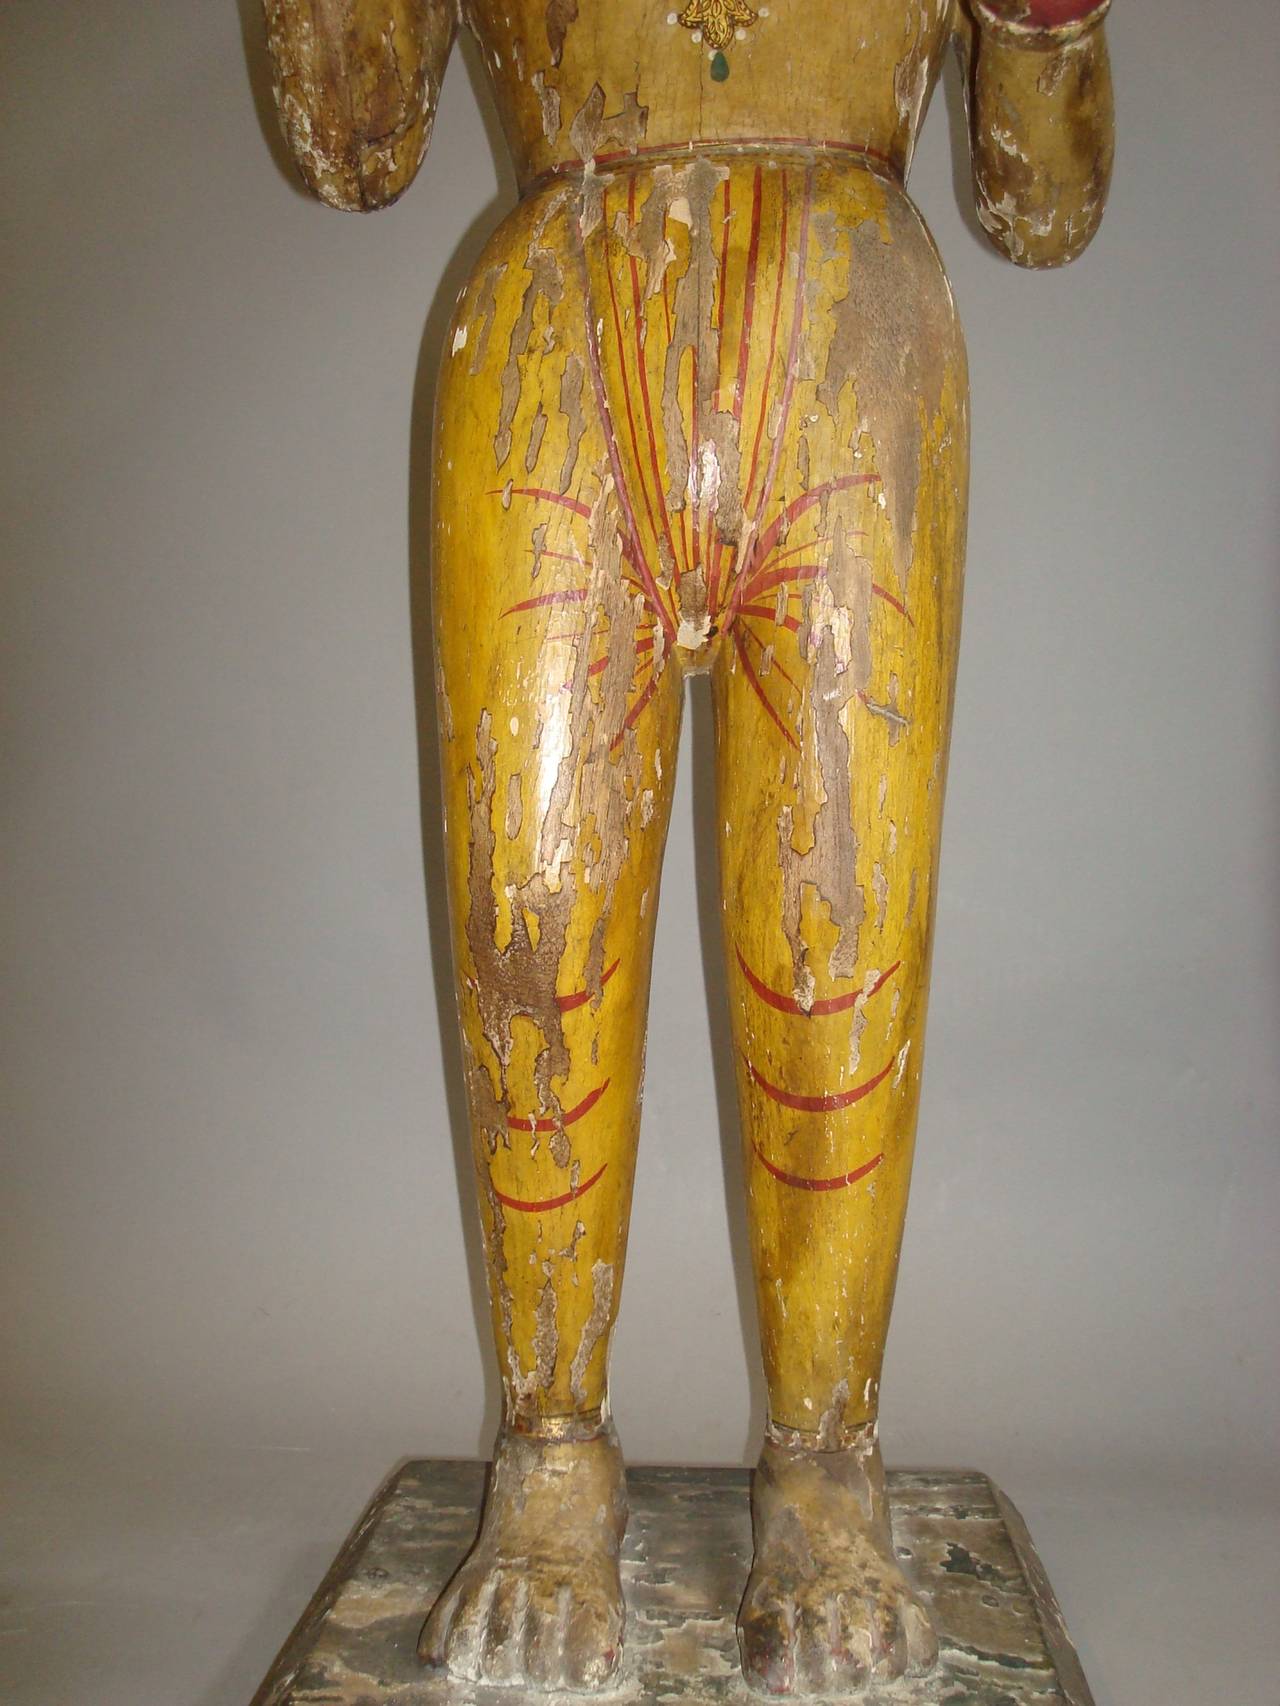 19th Century Carved Indian Figure For Sale 6